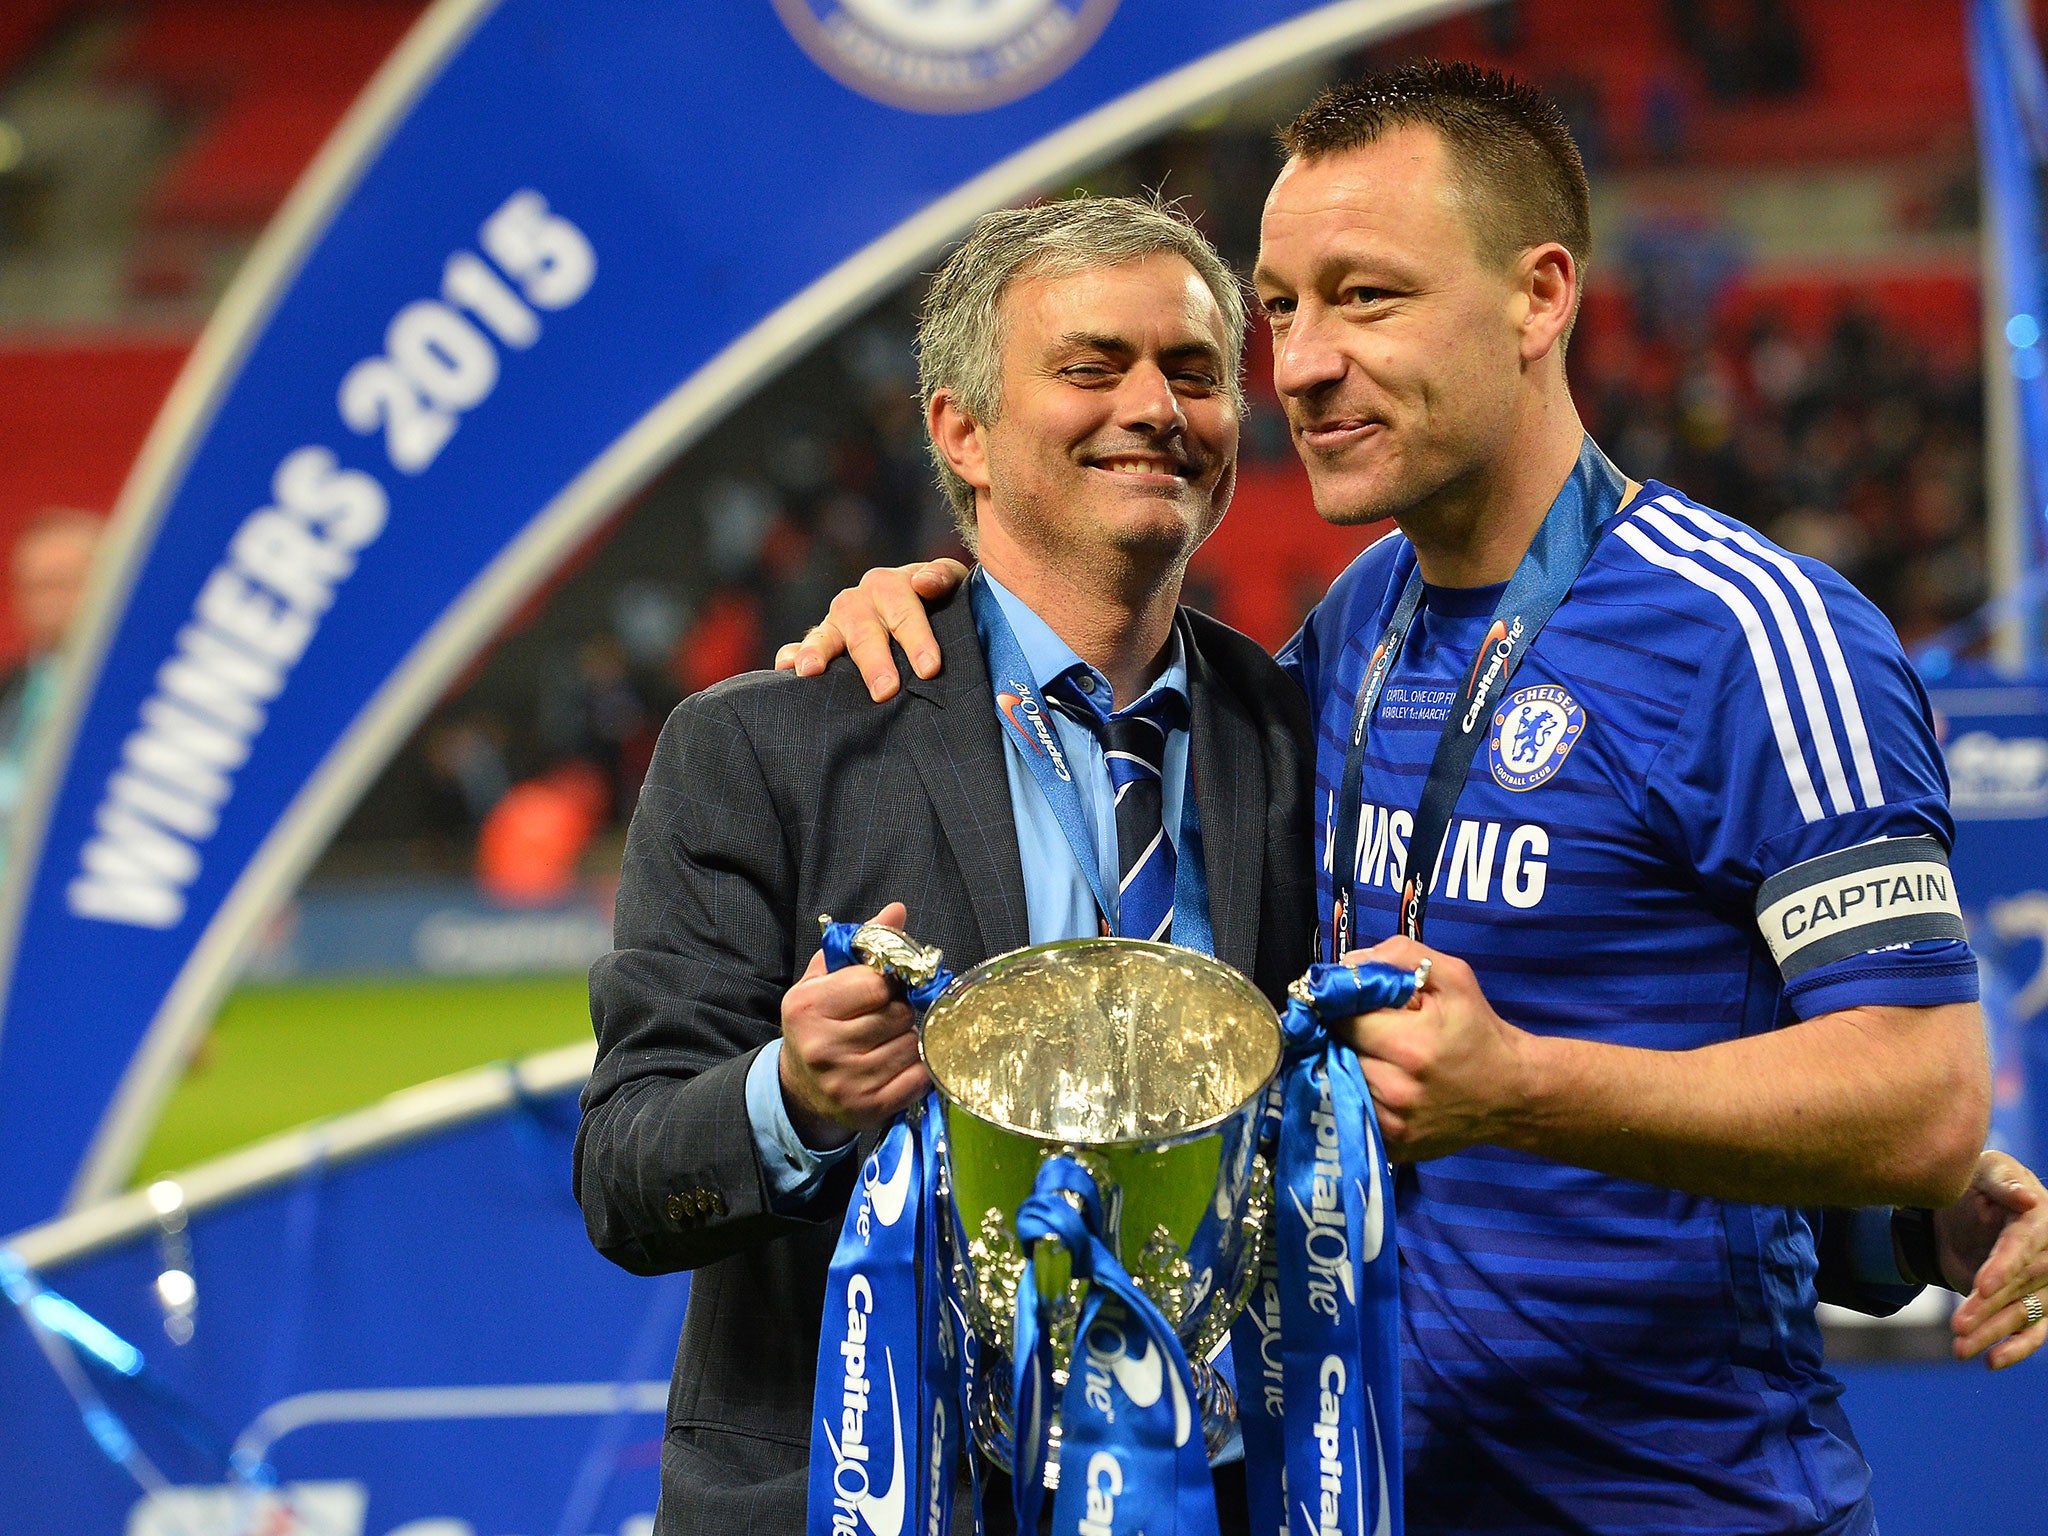 Jose Mourinho and John Terry celebrate winning the League Cup together in 2015